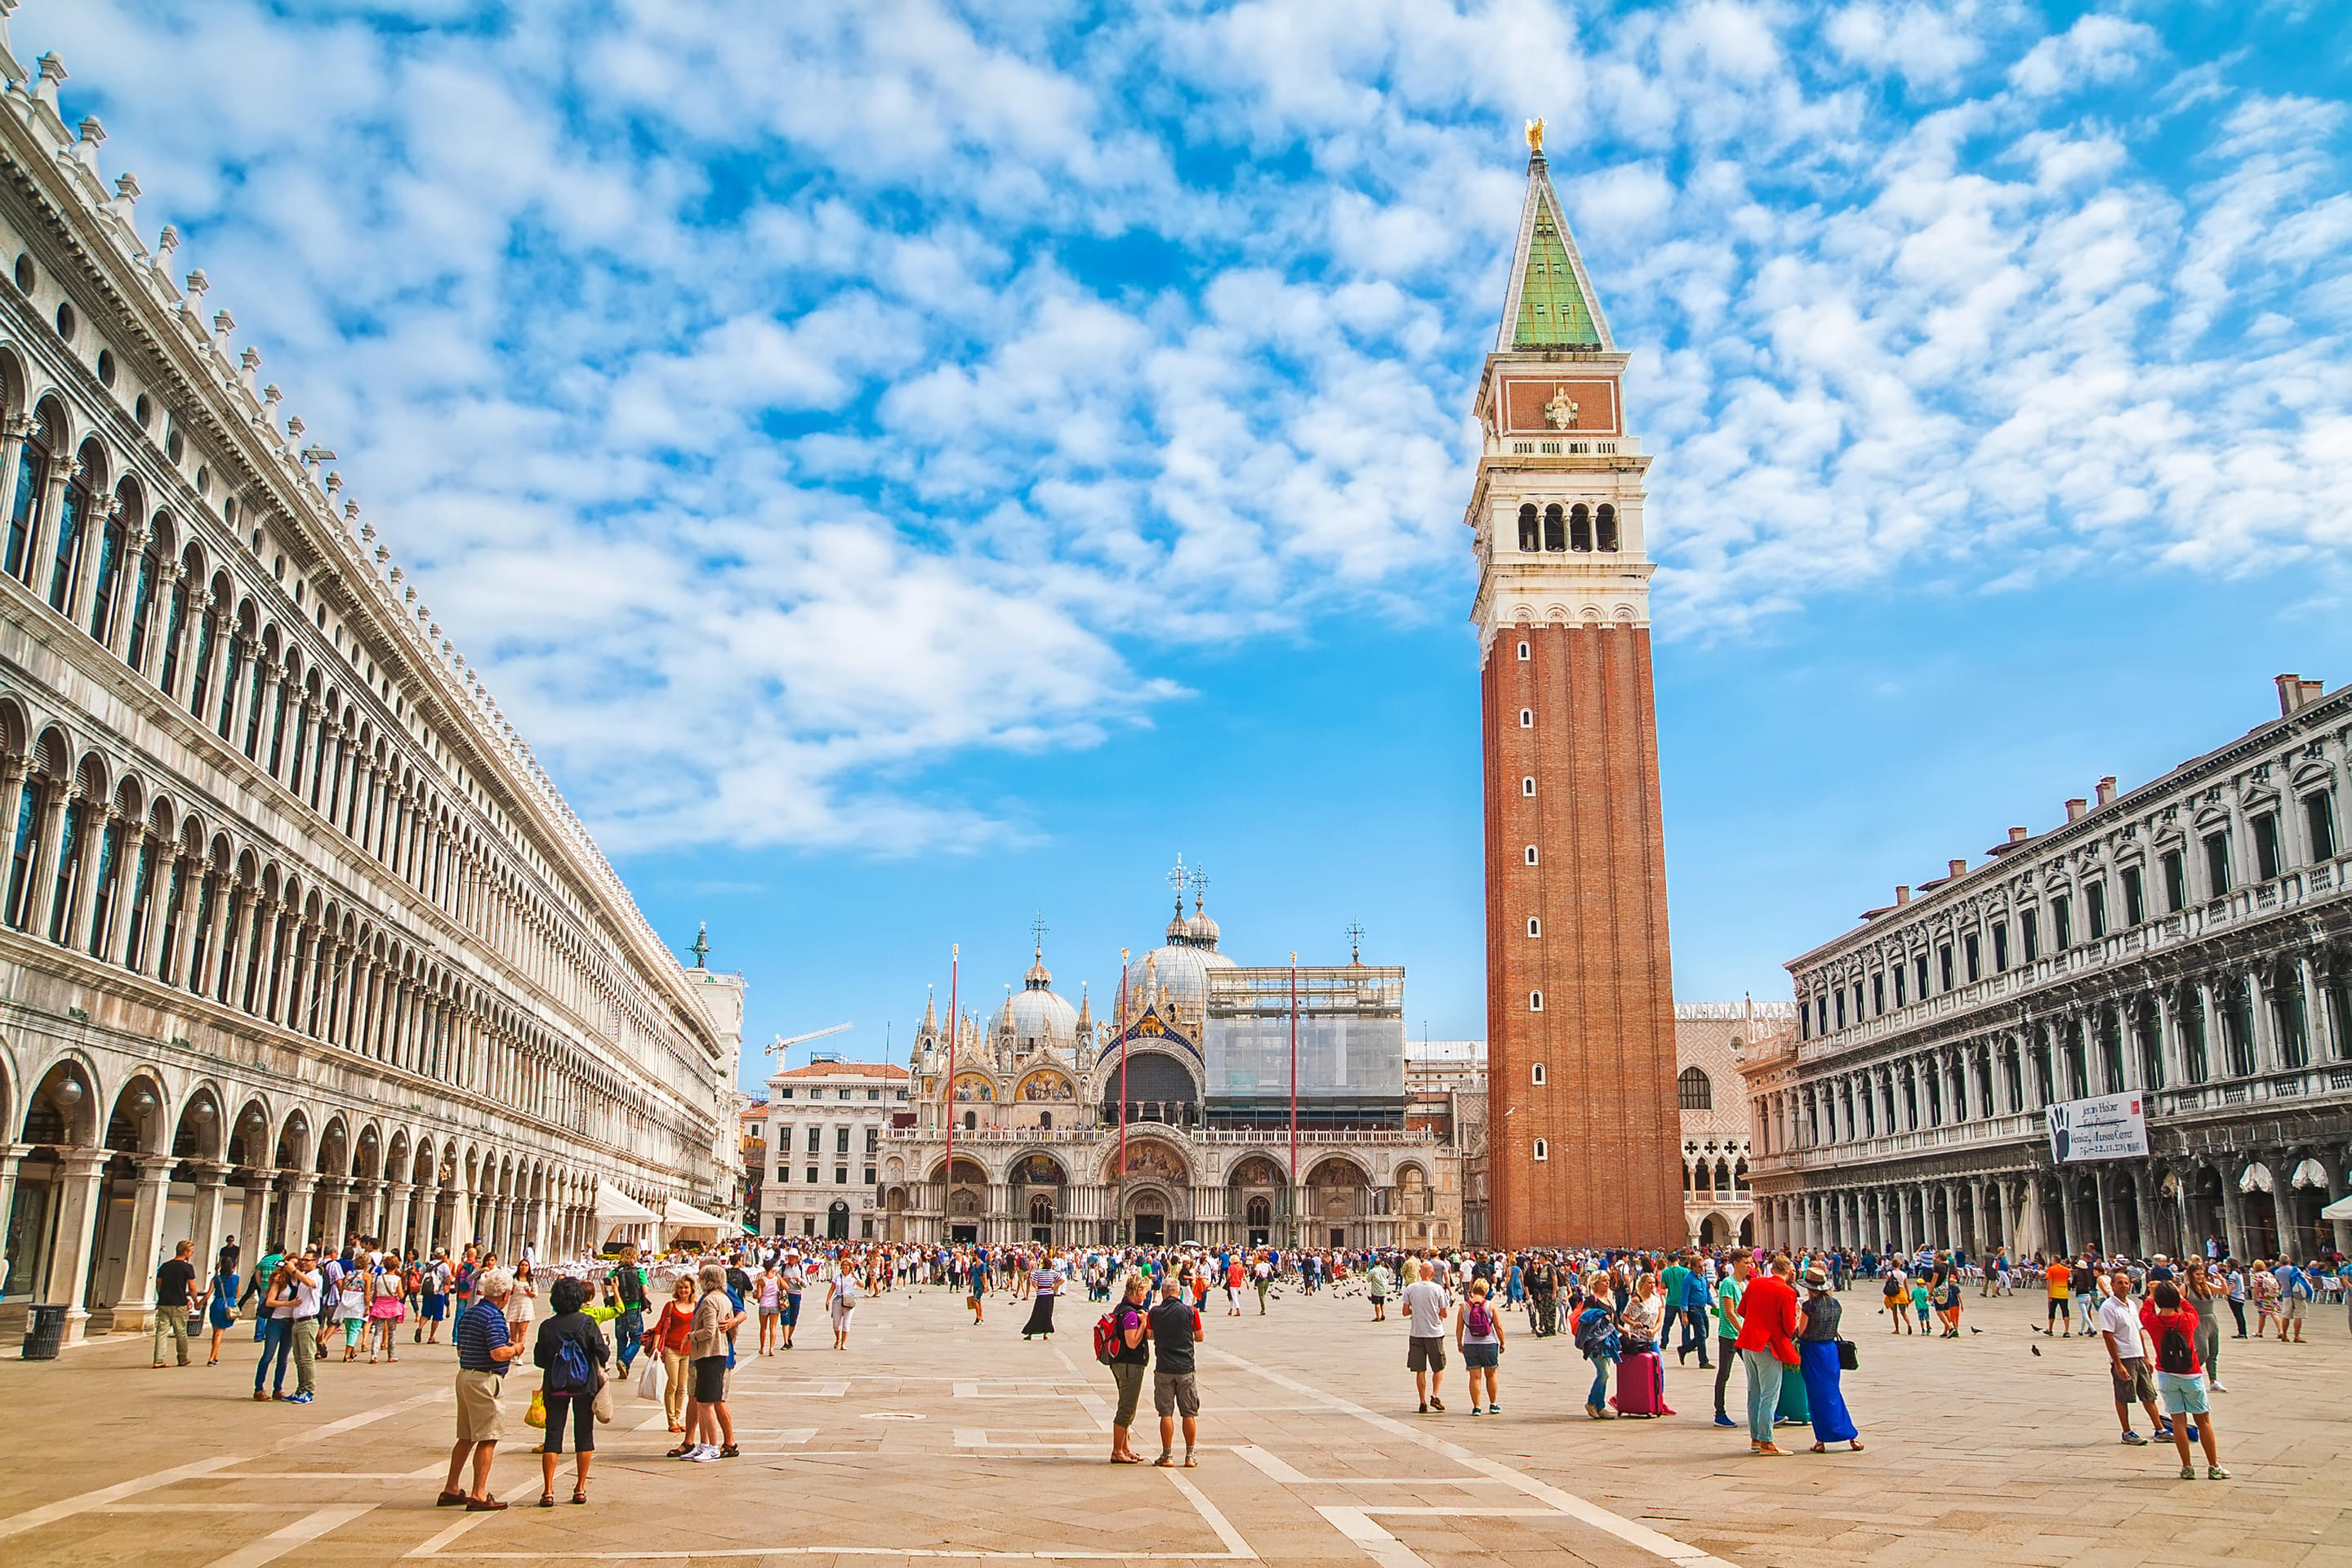 Piazza San Marco Overview